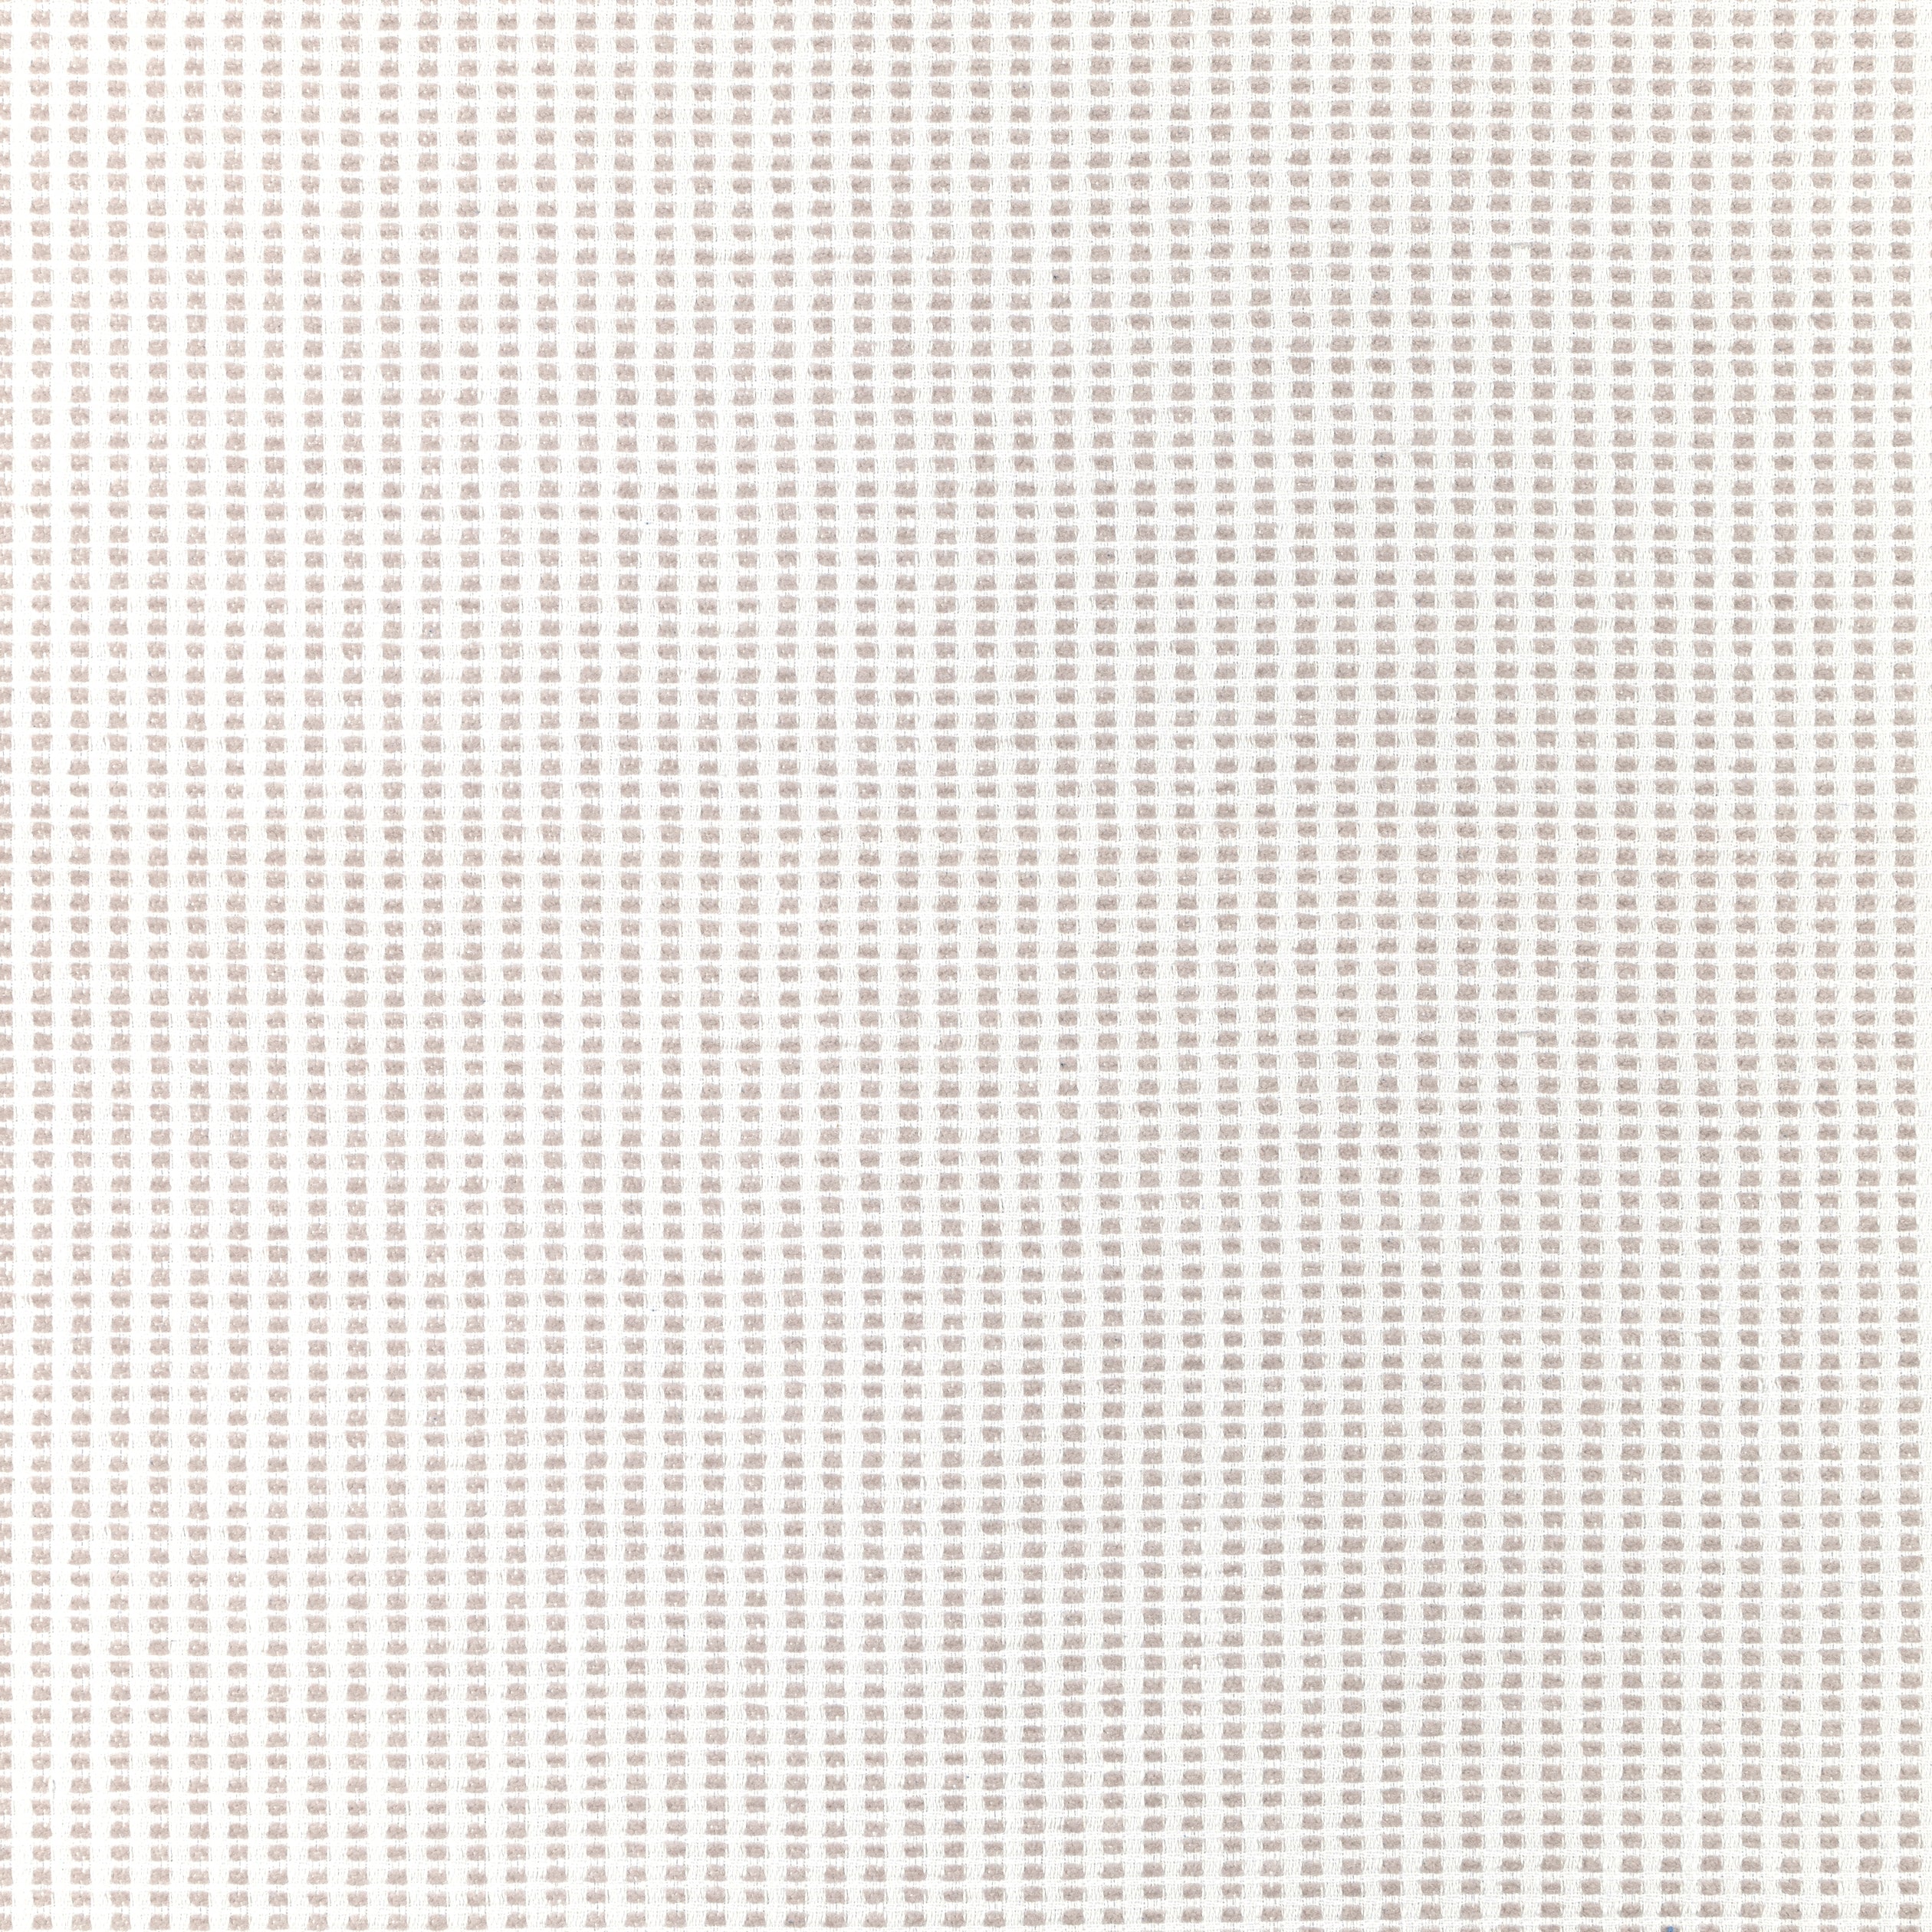 Stratus fabric in heather color - pattern number W75230 - by Thibaut in the Elements collection